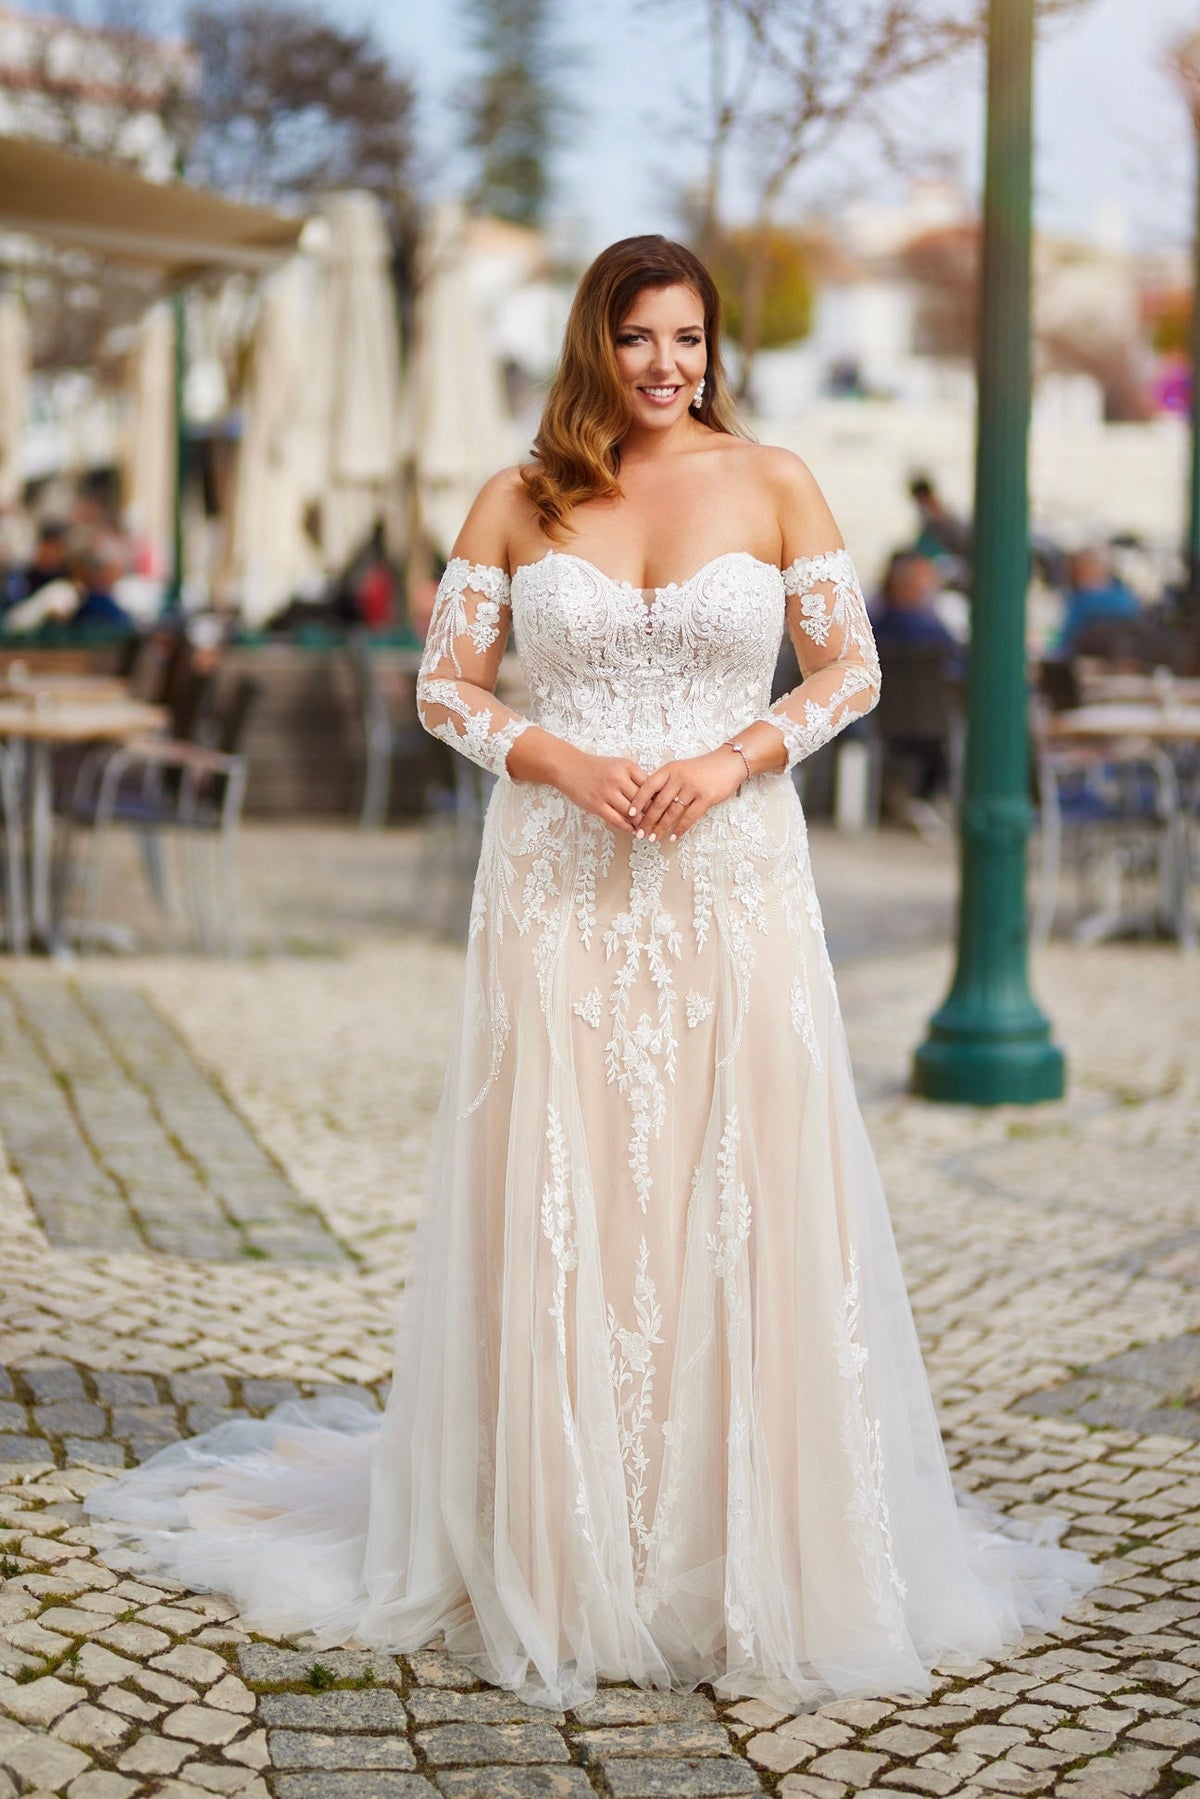 Beautiful Boho Fit and Flare Detachable Illusion Lace Sleeves Sweetheart Neckline Wedding Dress Bridal Gown Open Back Train Strapless